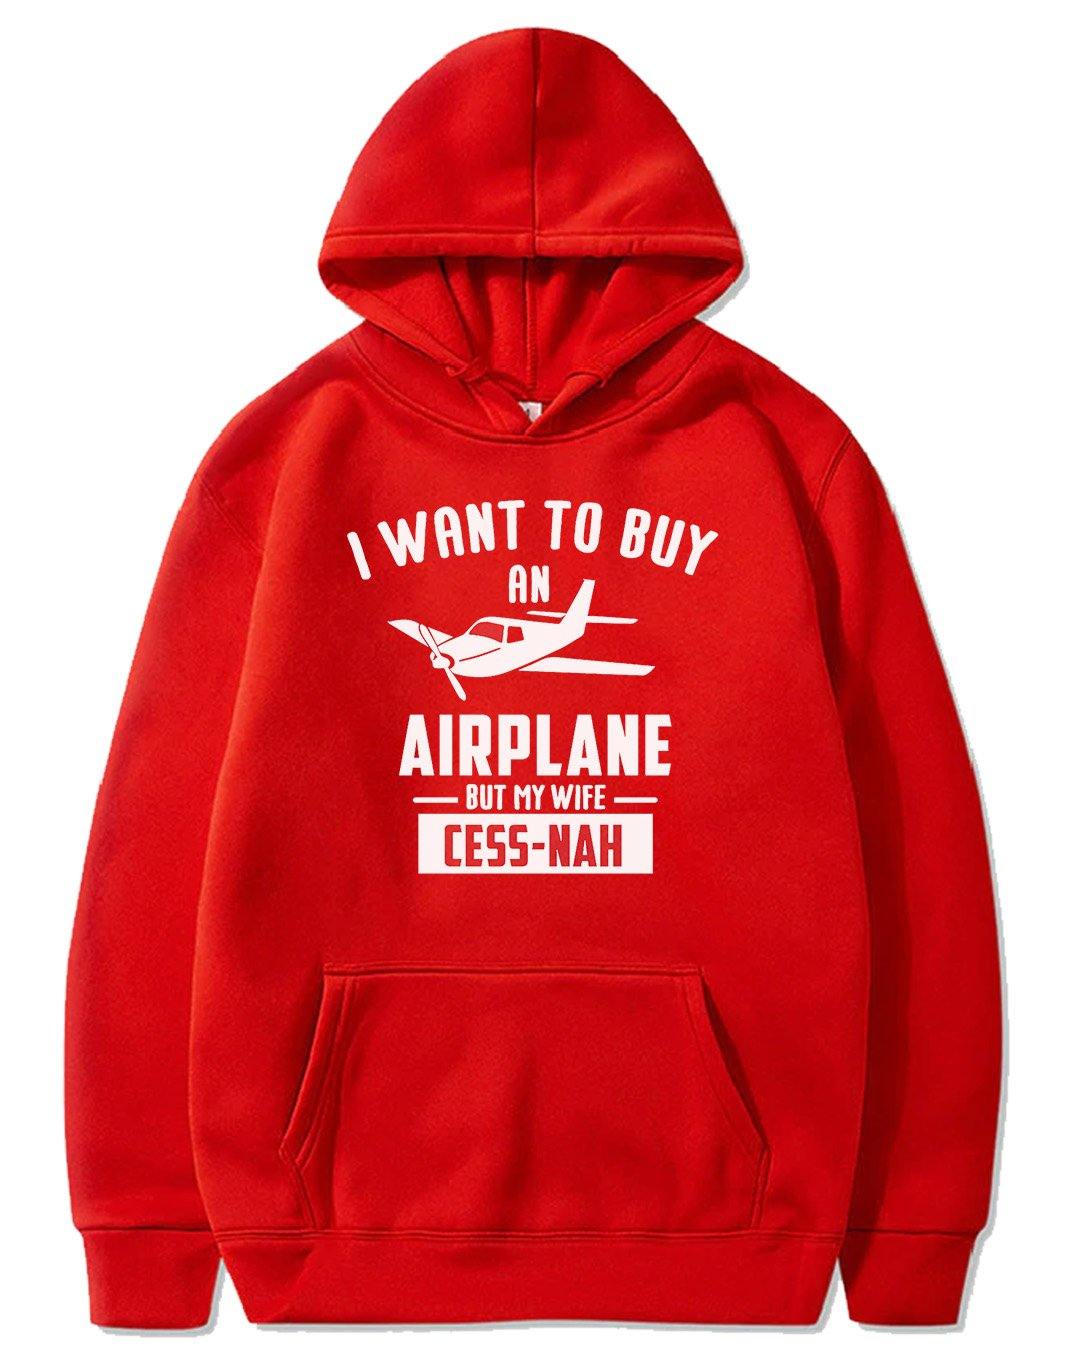 I WANT TO BUY AN AIRPLANE BUT MY WIFE CESS-NAH PULLOVER THE AV8R